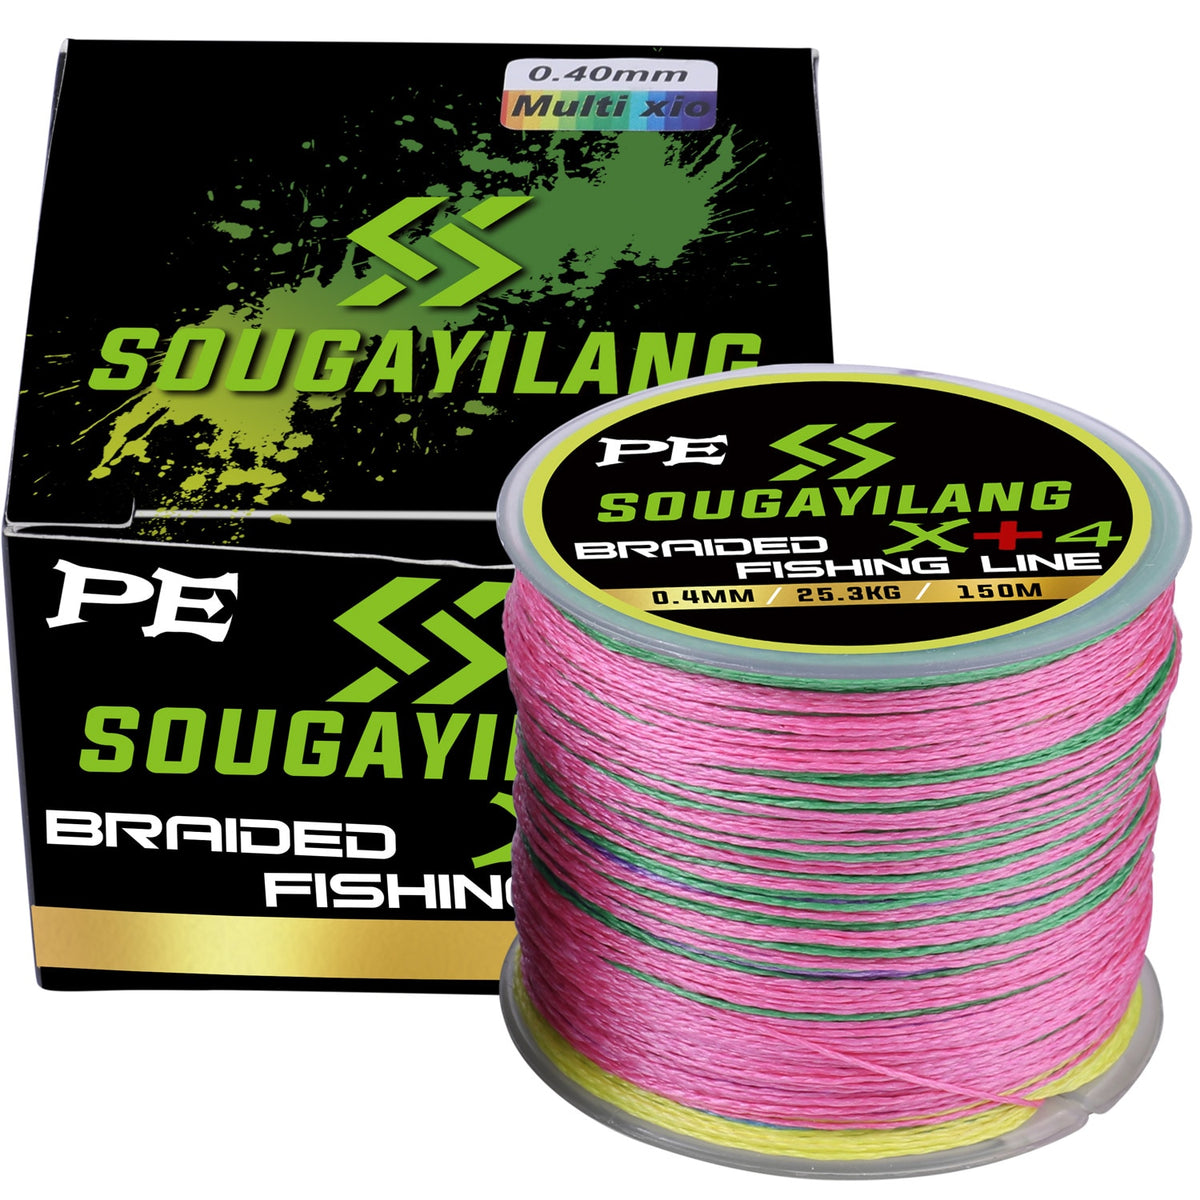  Braided Fishing Wire New 4 Strands PE Fishing Line Braid Fishing  Line 150M 500M Multifilament Fishing Wire Carp Fishing Line Fishing Tool  Braided Fishing Line (Color : Blue, Size 